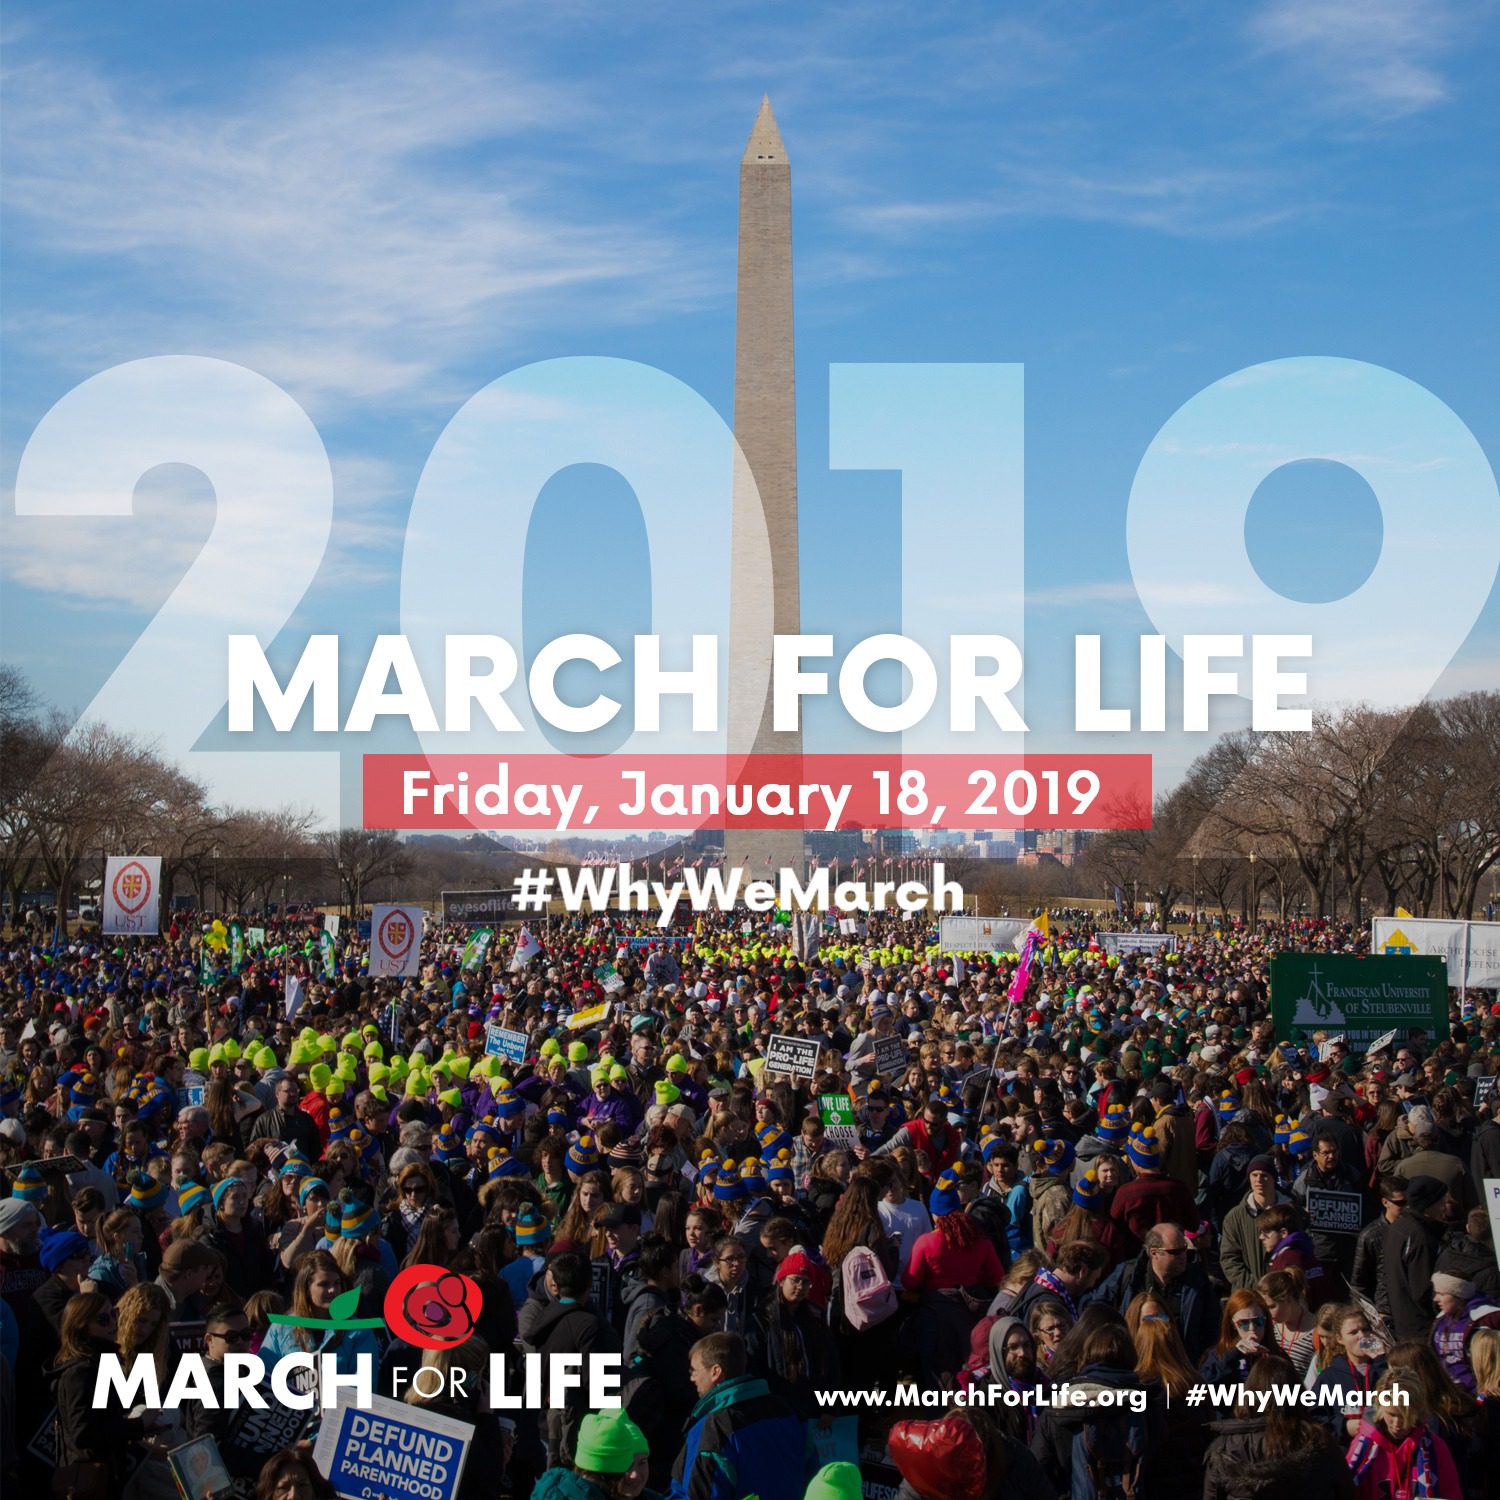 6 Ways to Get Ready for the 2019 March for Life!